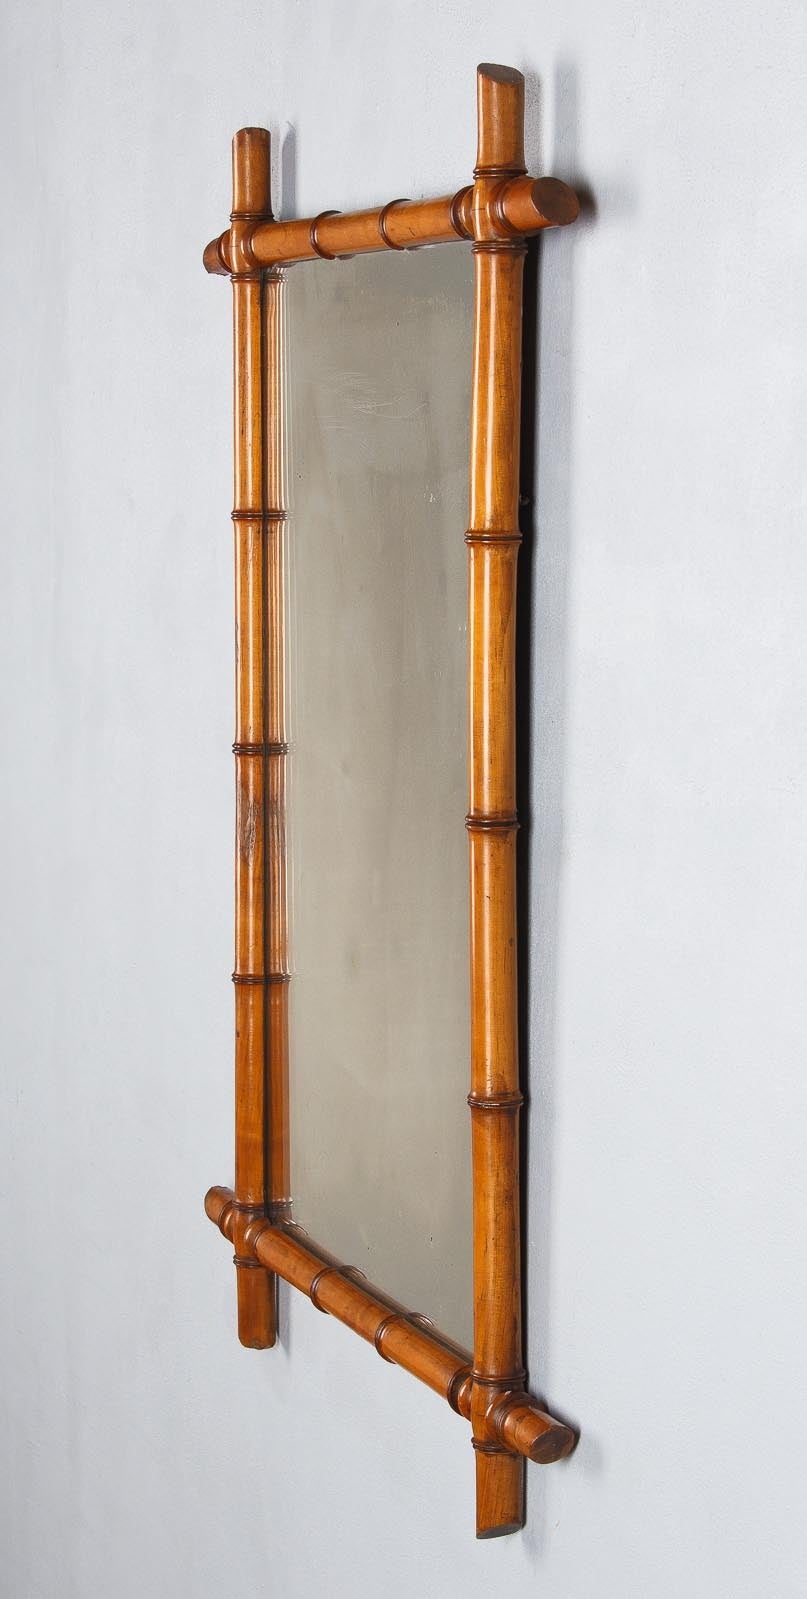 A French Colonial style mirror with a faux-bamboo frame made of cherrywood. The mirrored glass itself is 32" high x 20" wide.